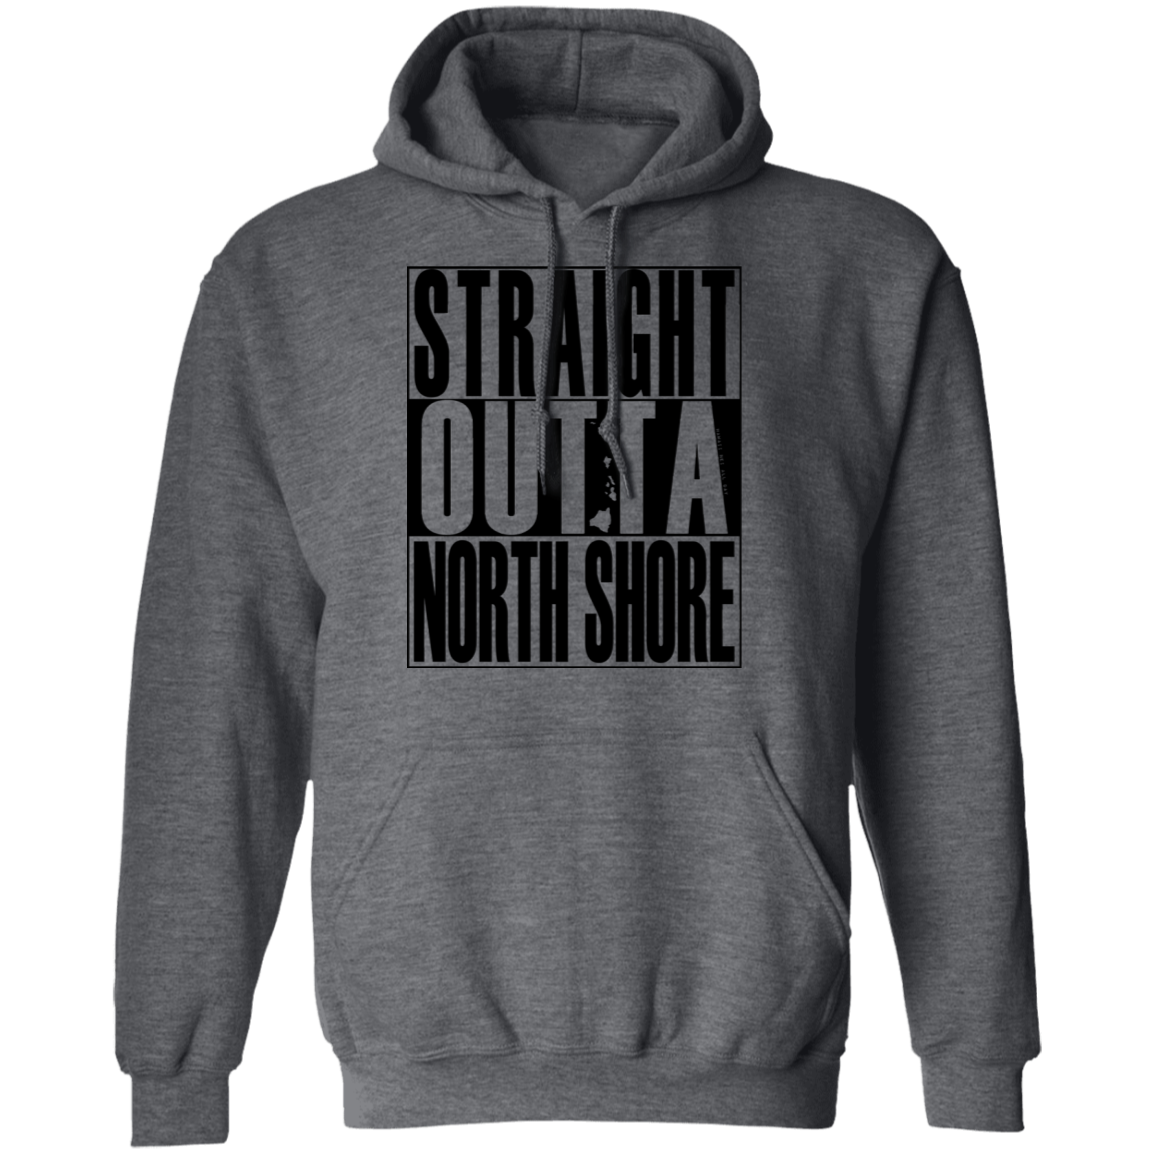 Straight Outta North Shore (black ink) Pullover Hoodie